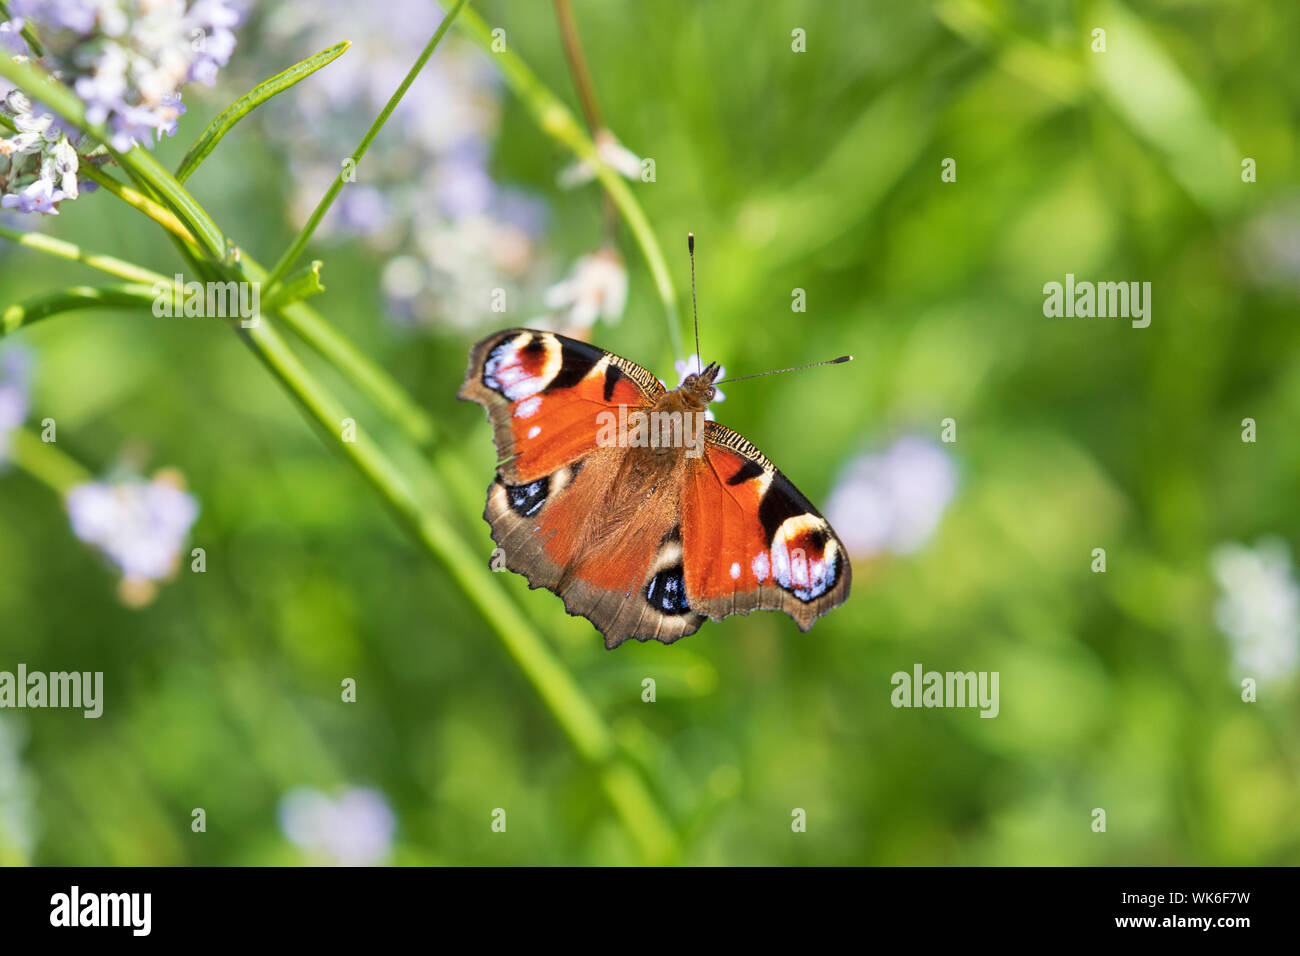 A beautiful peacock butterfly Aglais io resting on english lavender in a cottage garden Stock Photo